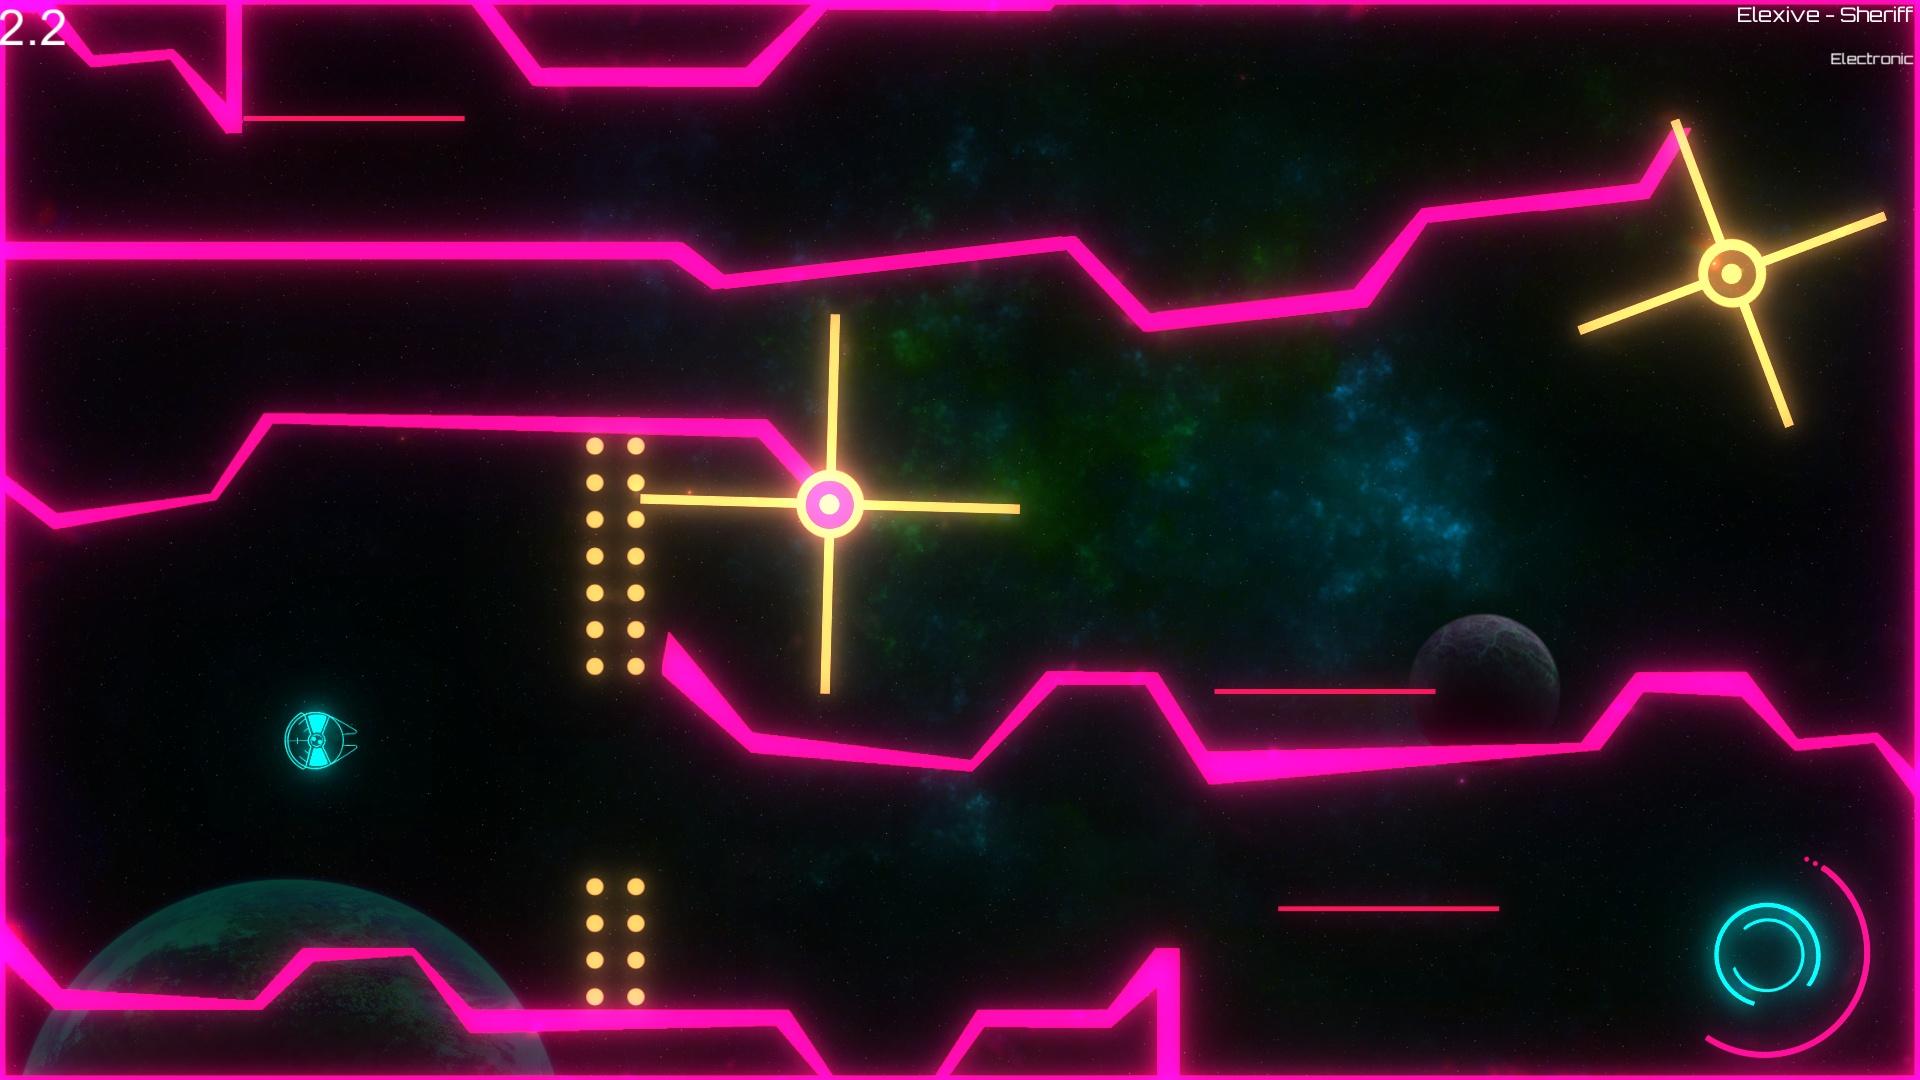 Screenshot №8 from game Neon Space 2